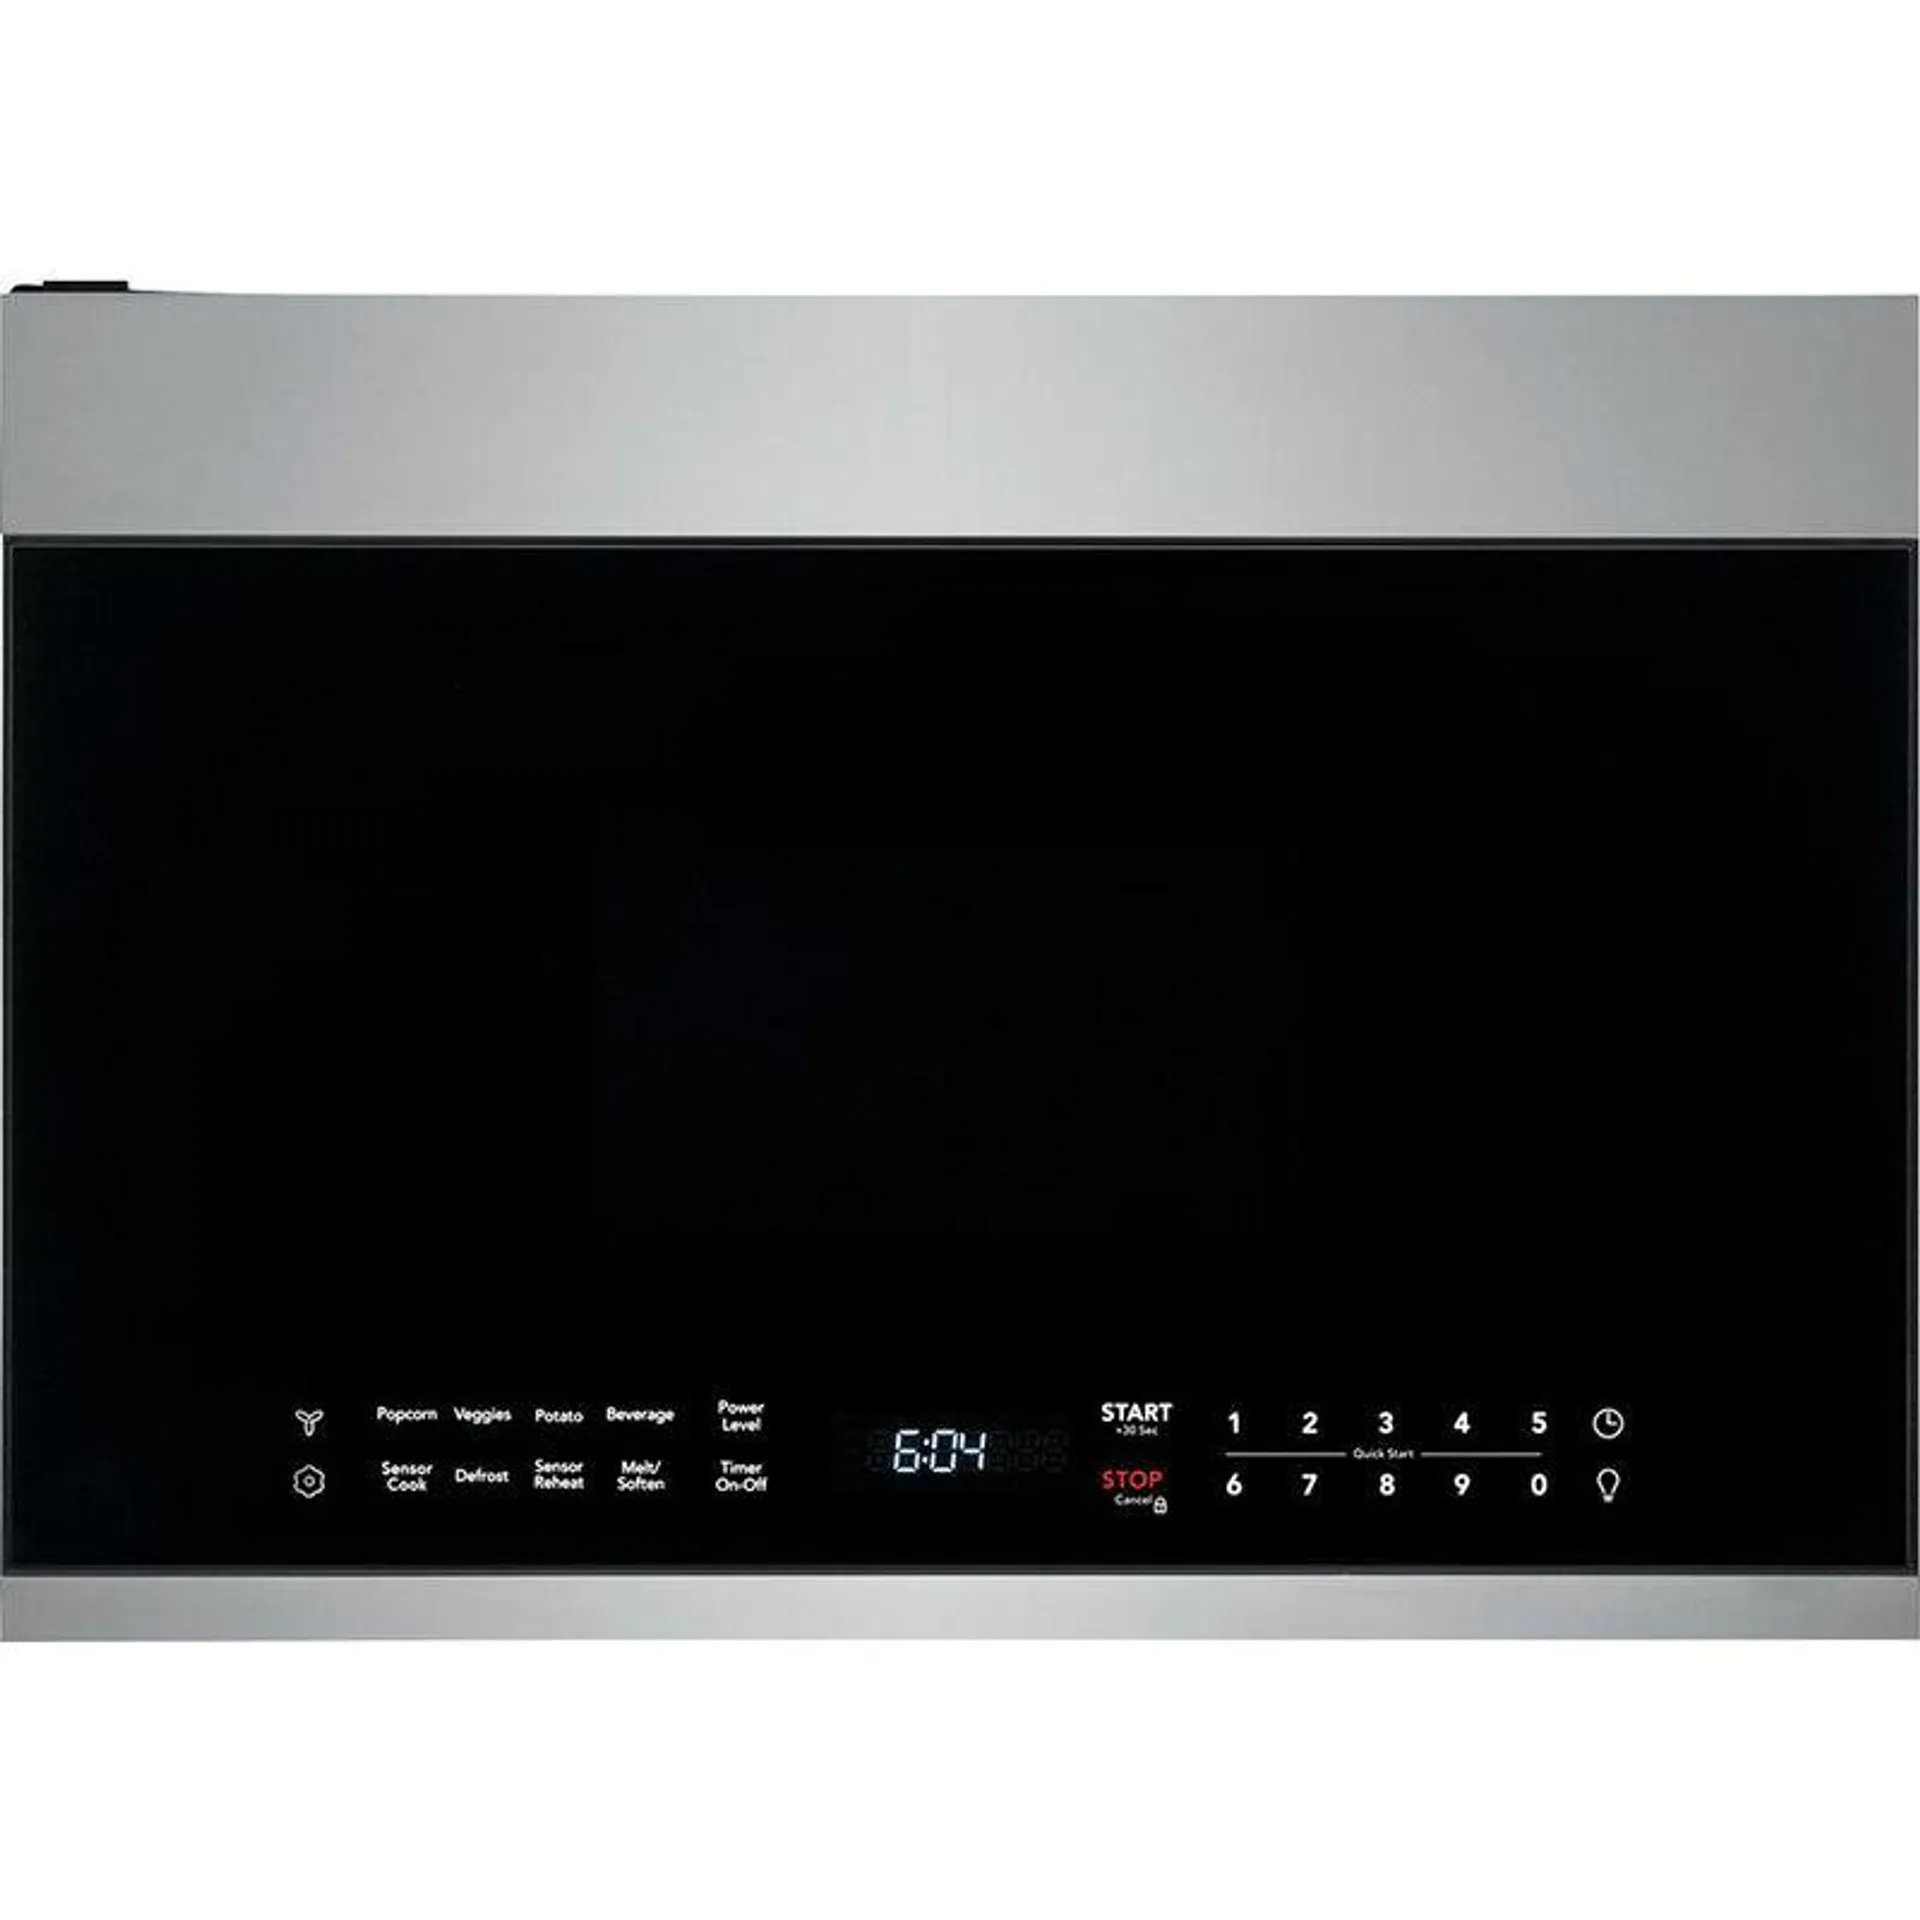 Frigidaire 24" 1.4 Cu. Ft. Over-the-Range Microwave with 9 Power Levels, 300 CFM & Sensor Cooking Controls - Stainless Steel